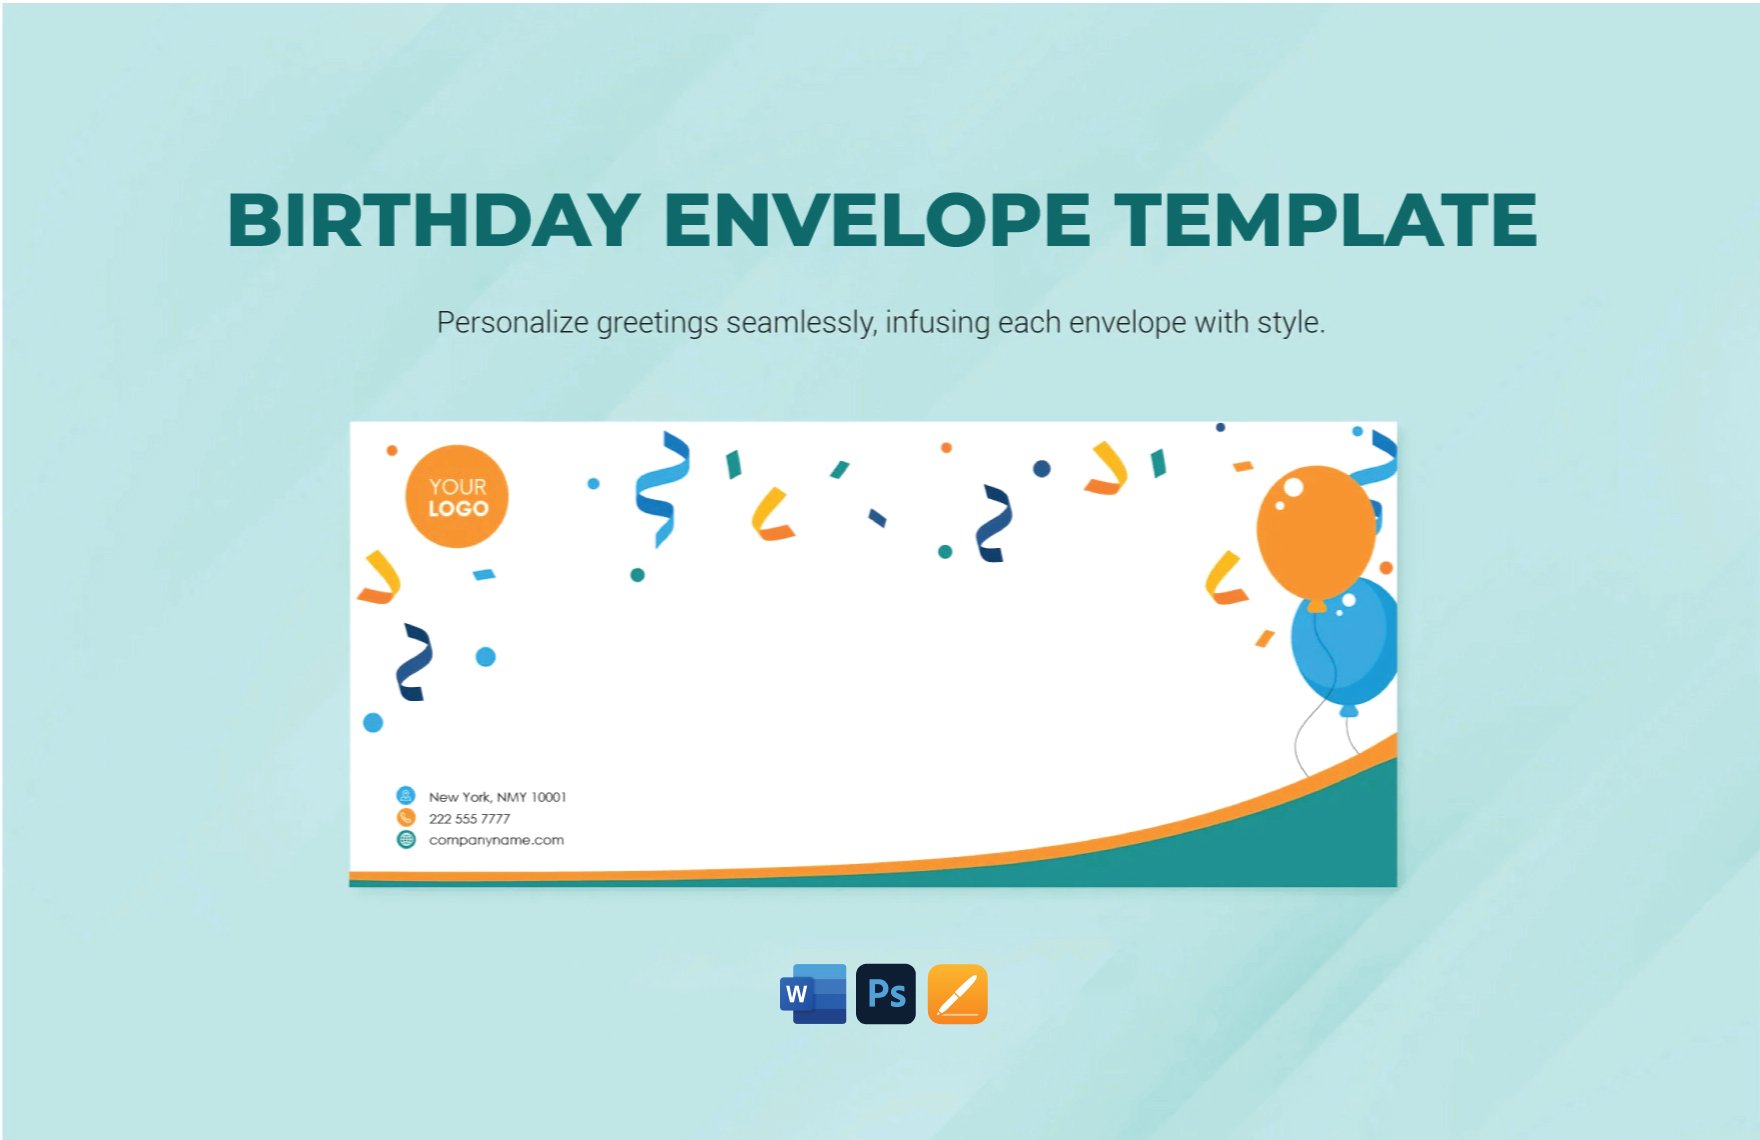 Free Birthday Envelope Template in Word, PSD, Apple Pages